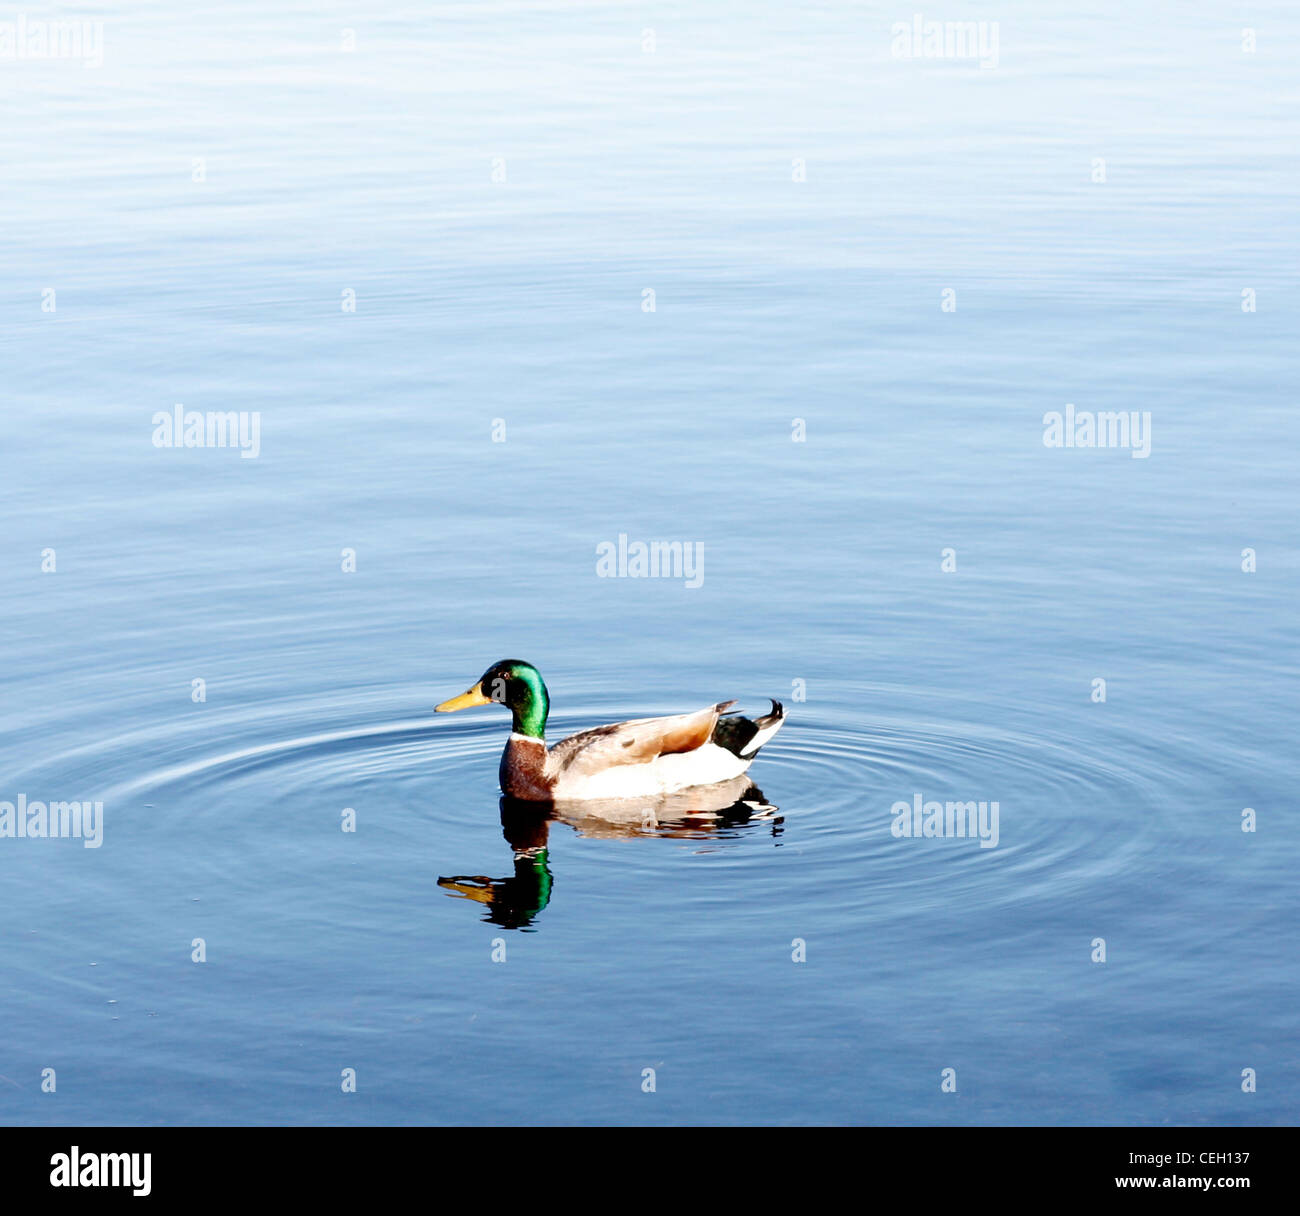 A duck swimming in water Stock Photo